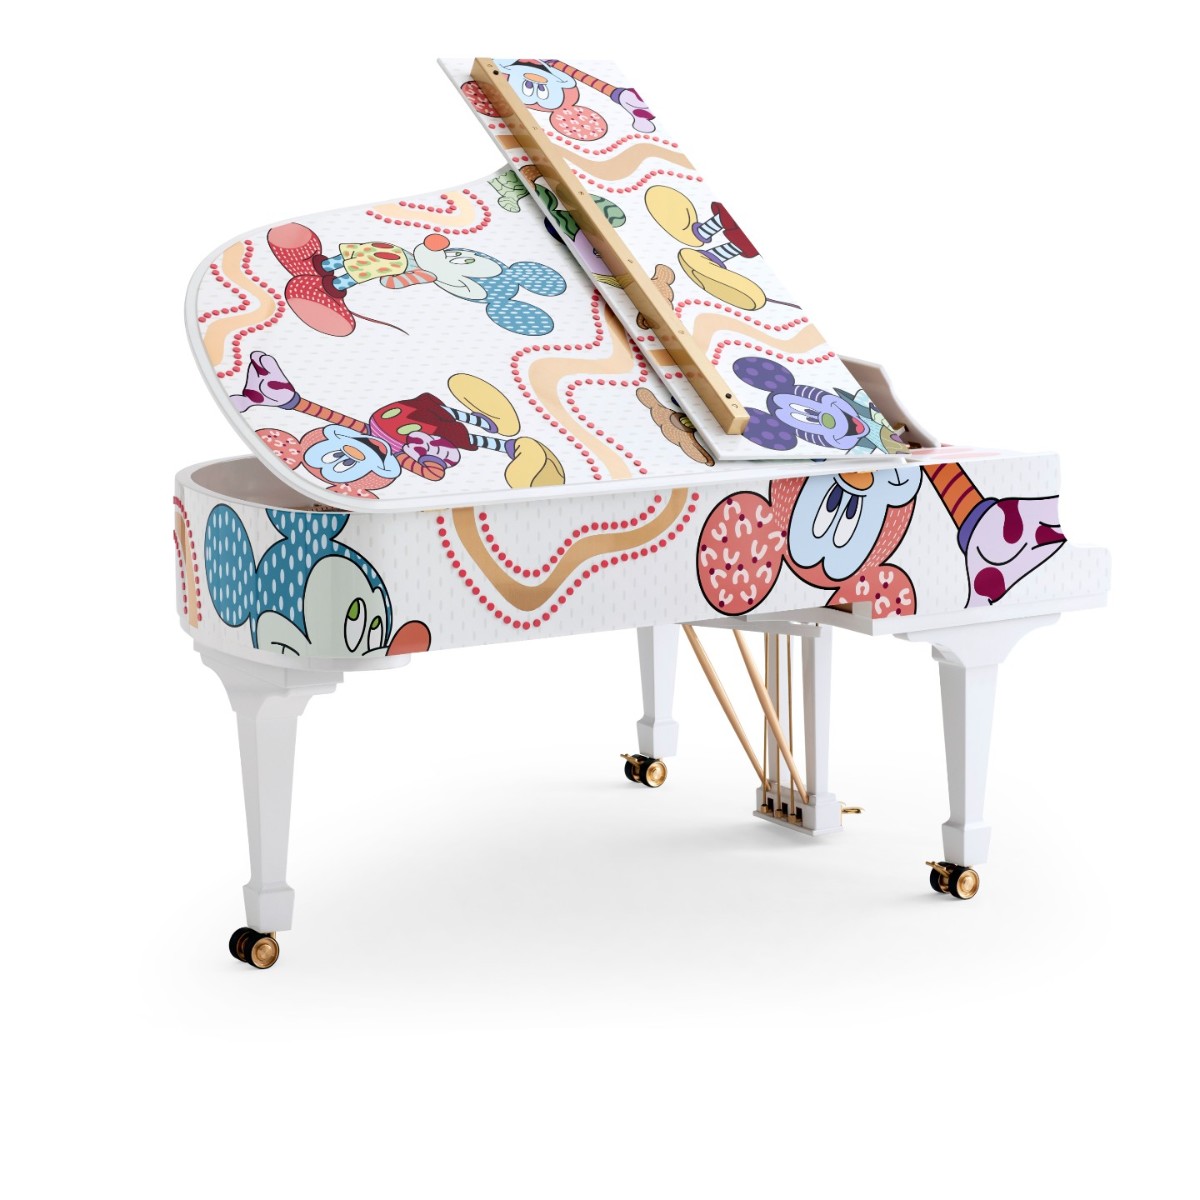 With only 25 pianos available worldwide, the Steinway X Disney: Mickey Mouse Limited Edition is a harmonious blend of timeless artistry and whimsical charm. Learn more ▶️ brnw.ch/21wJr9h 🎹✨